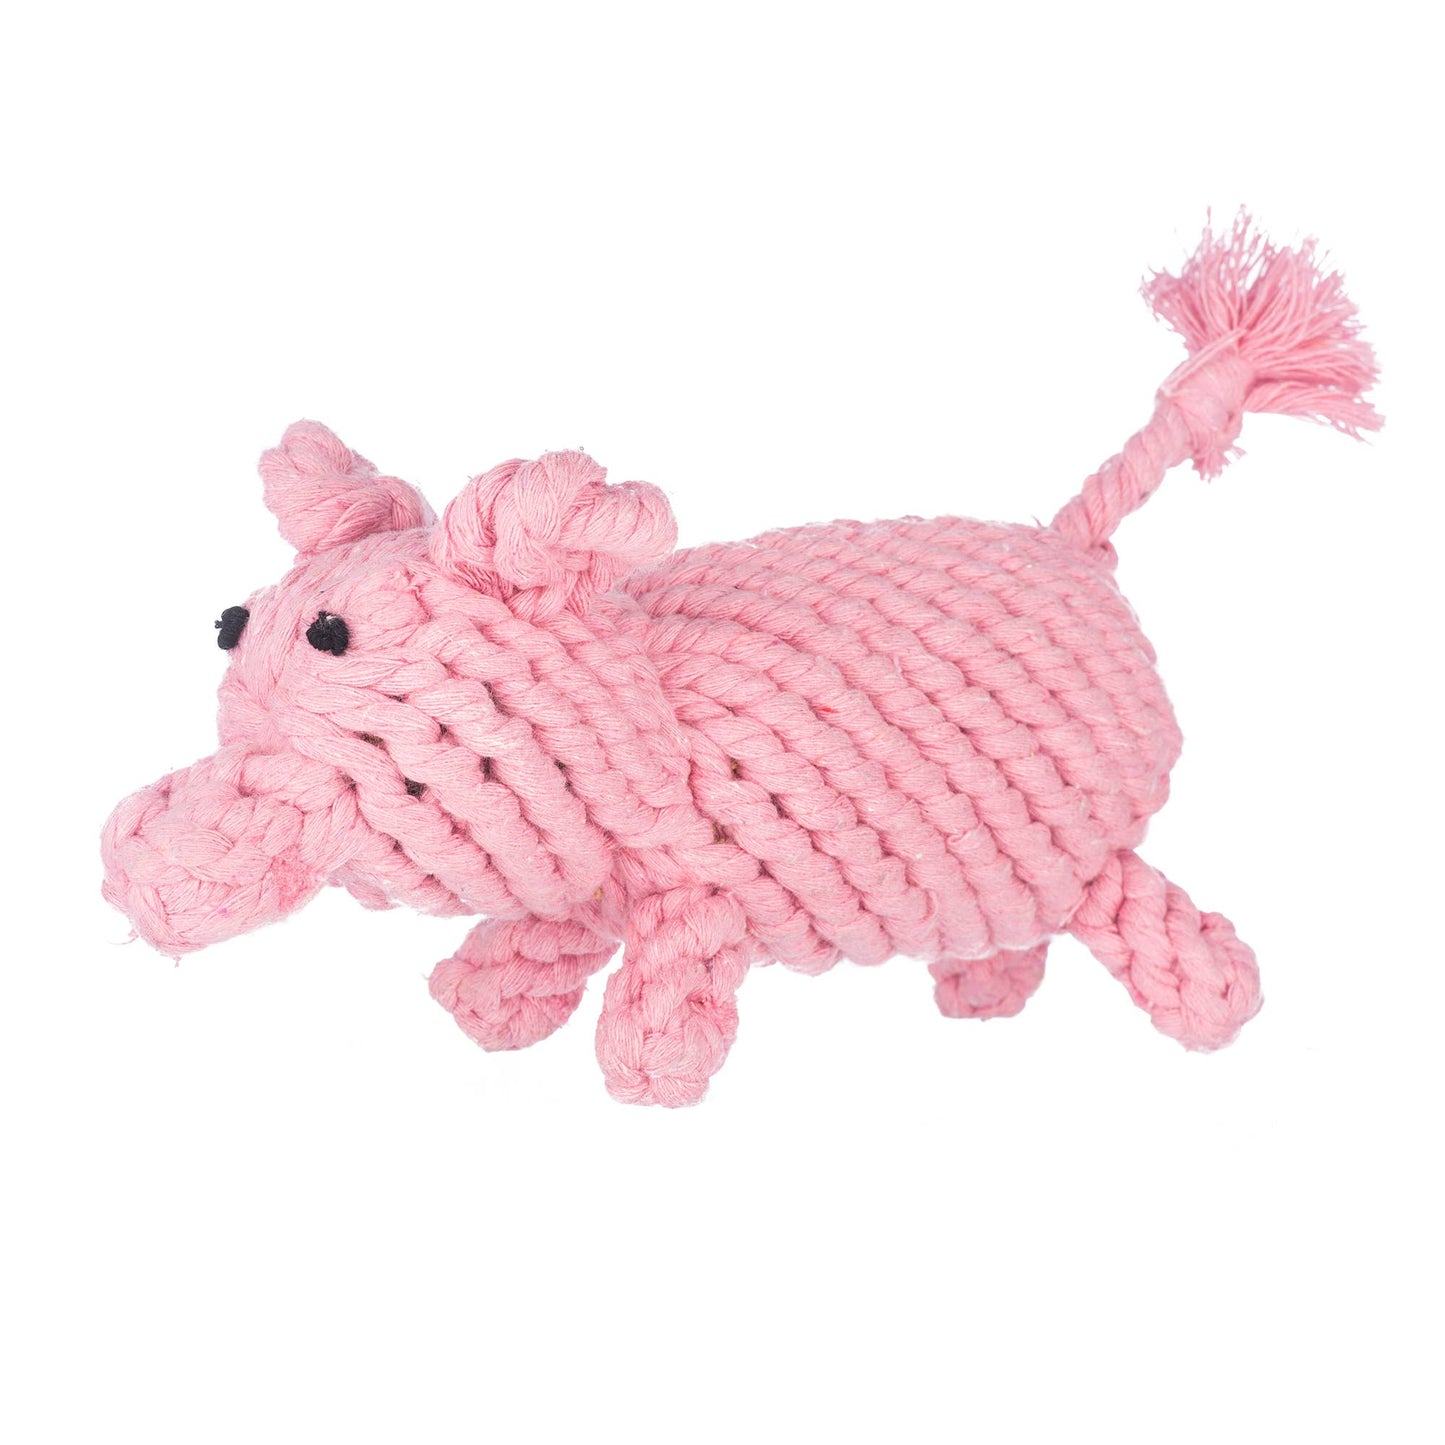 Penny the Pig Rope Toy 7" (Small)